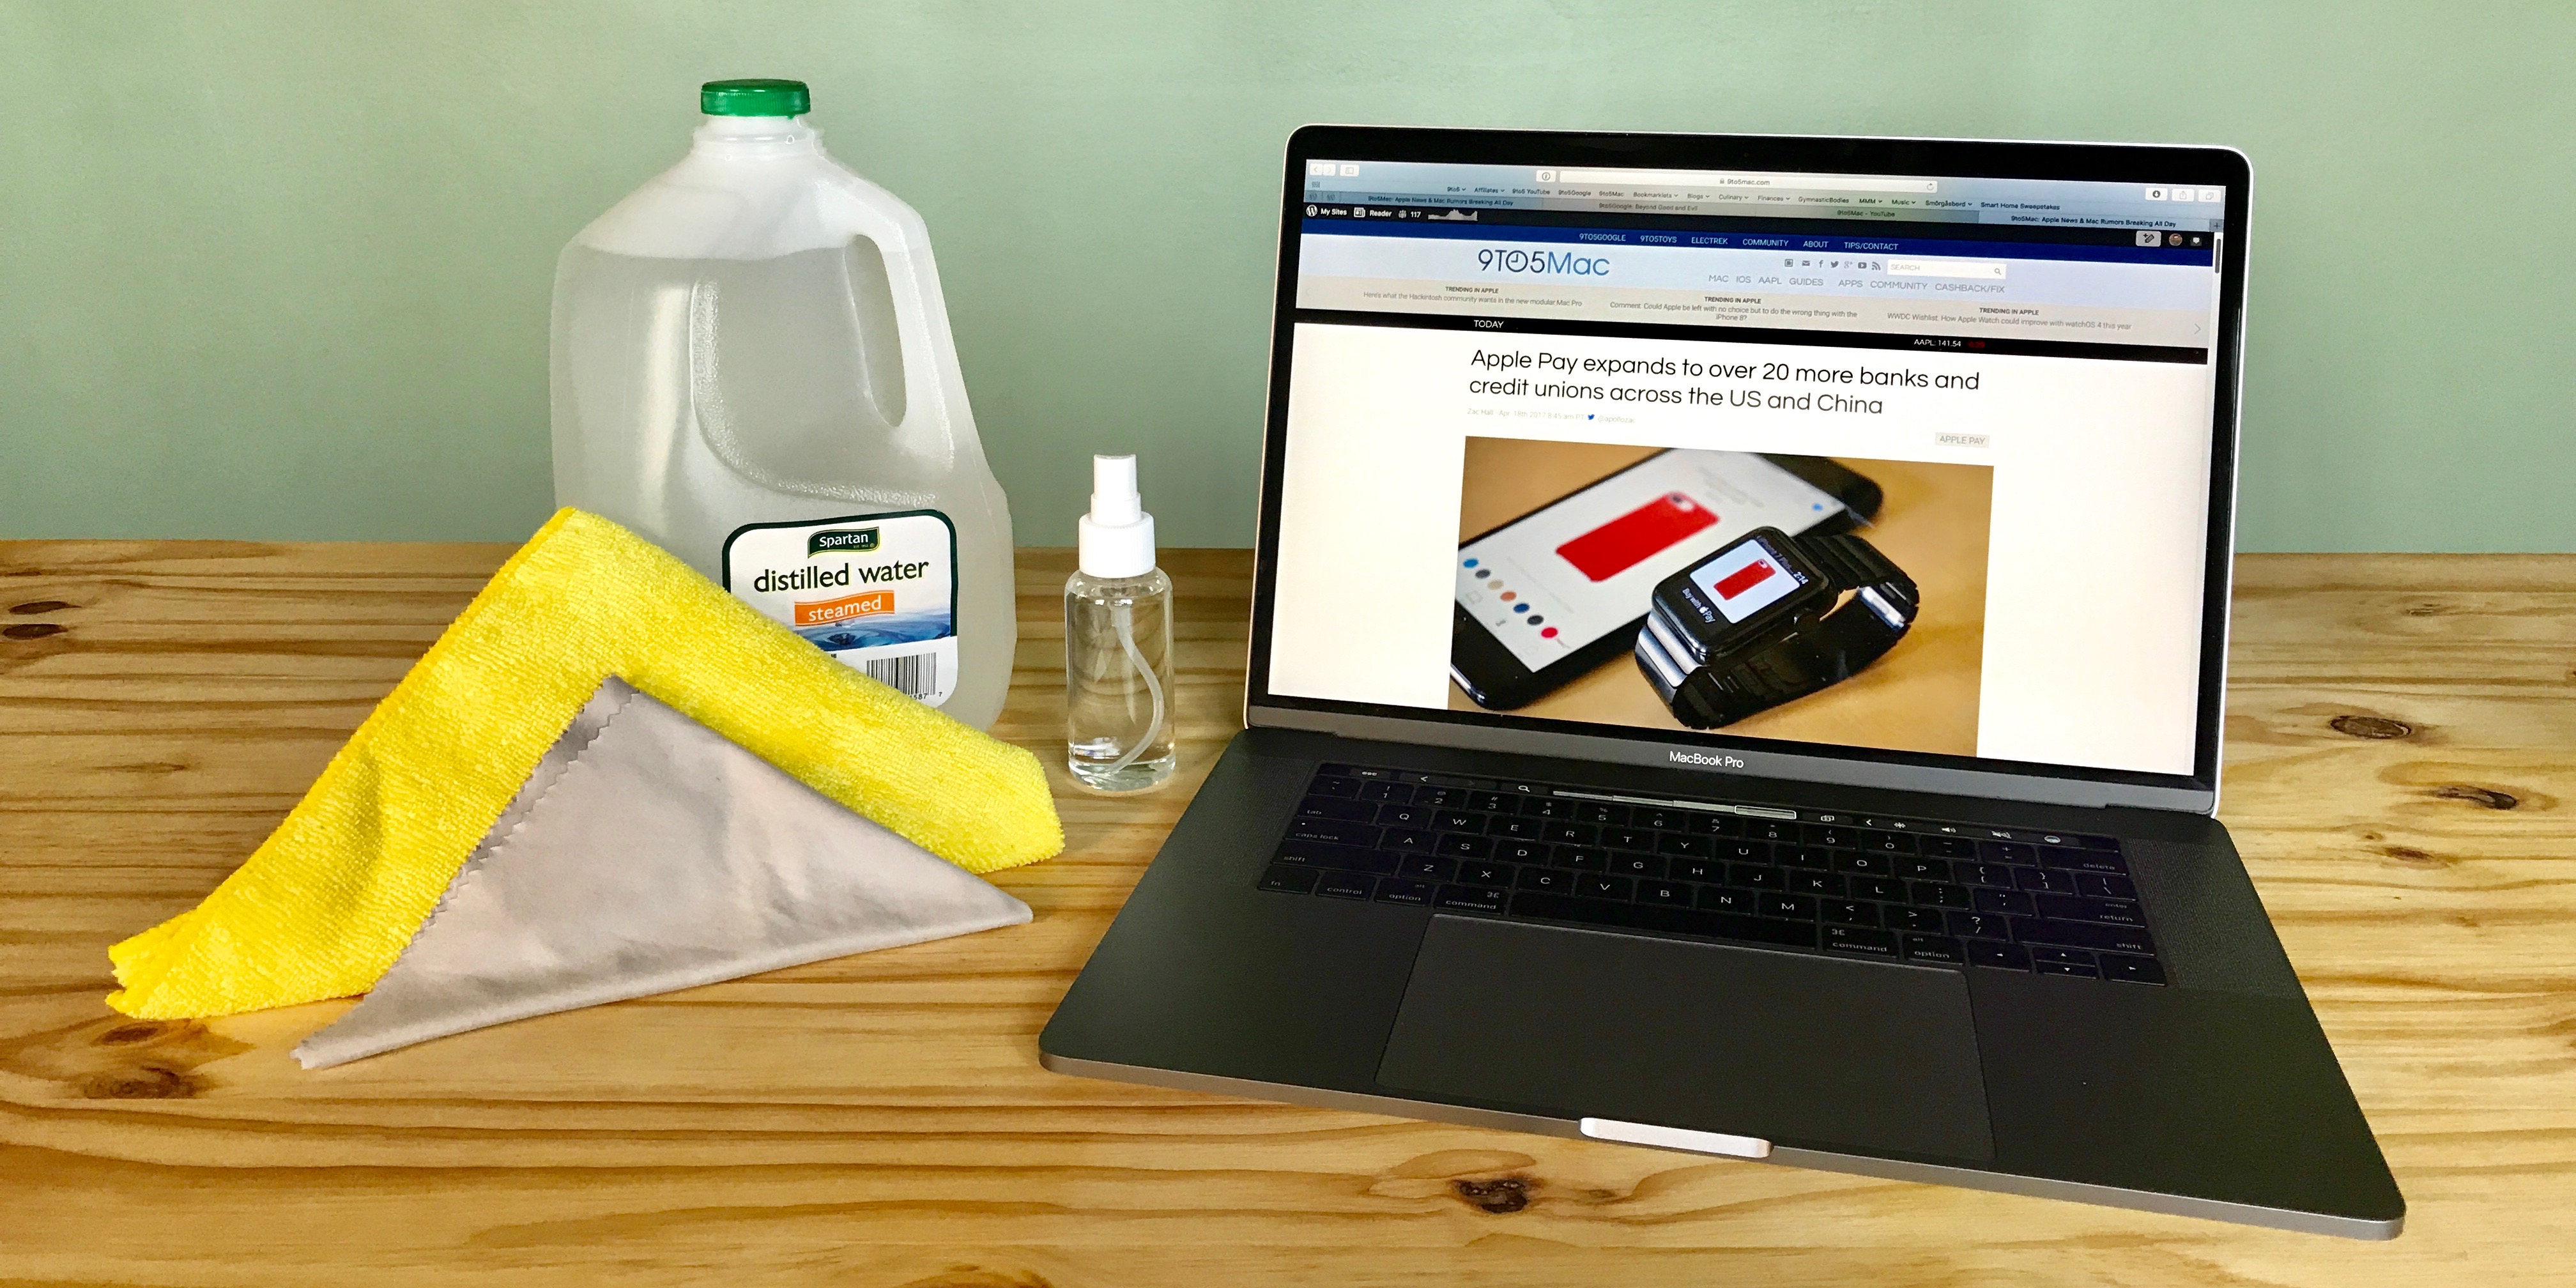 how to clean hard drive on macbook